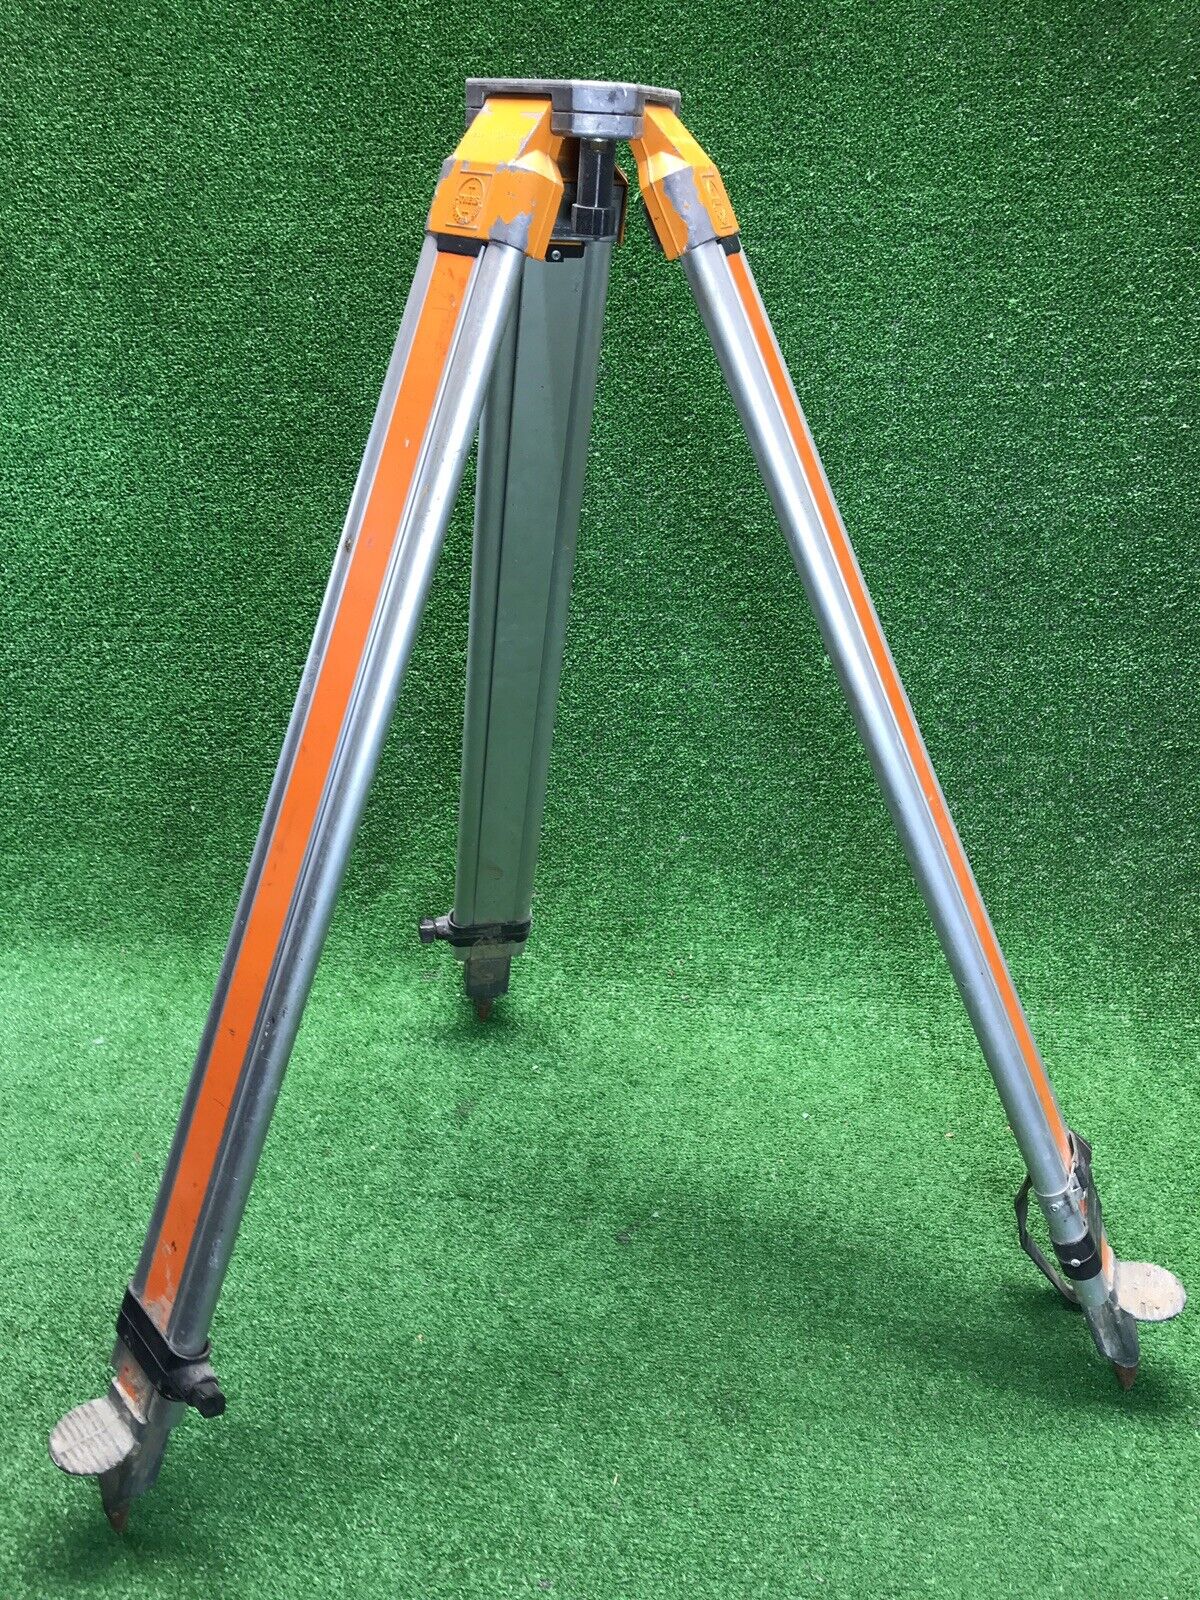 THEIS WOLZHAUSEN construction level theodolite Tripod made In Germany